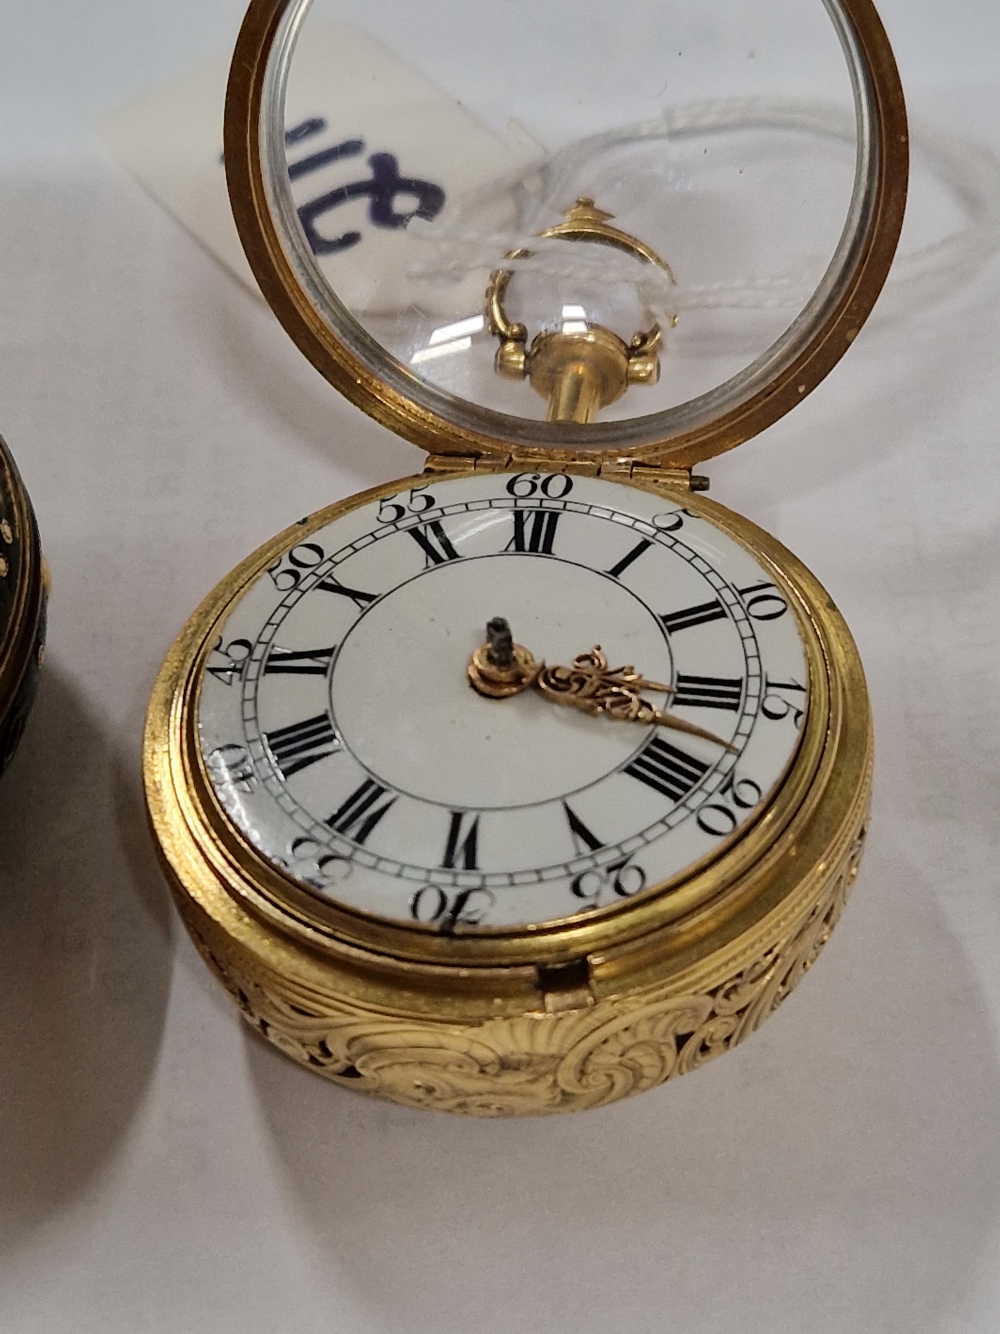 AN ANTIQUE GOLD PAIR CASED POCKET WATCH, SIGNED BONLY LONDON, (SIC) PROBABLY DEVERAUX BOWLEY, - Image 16 of 21